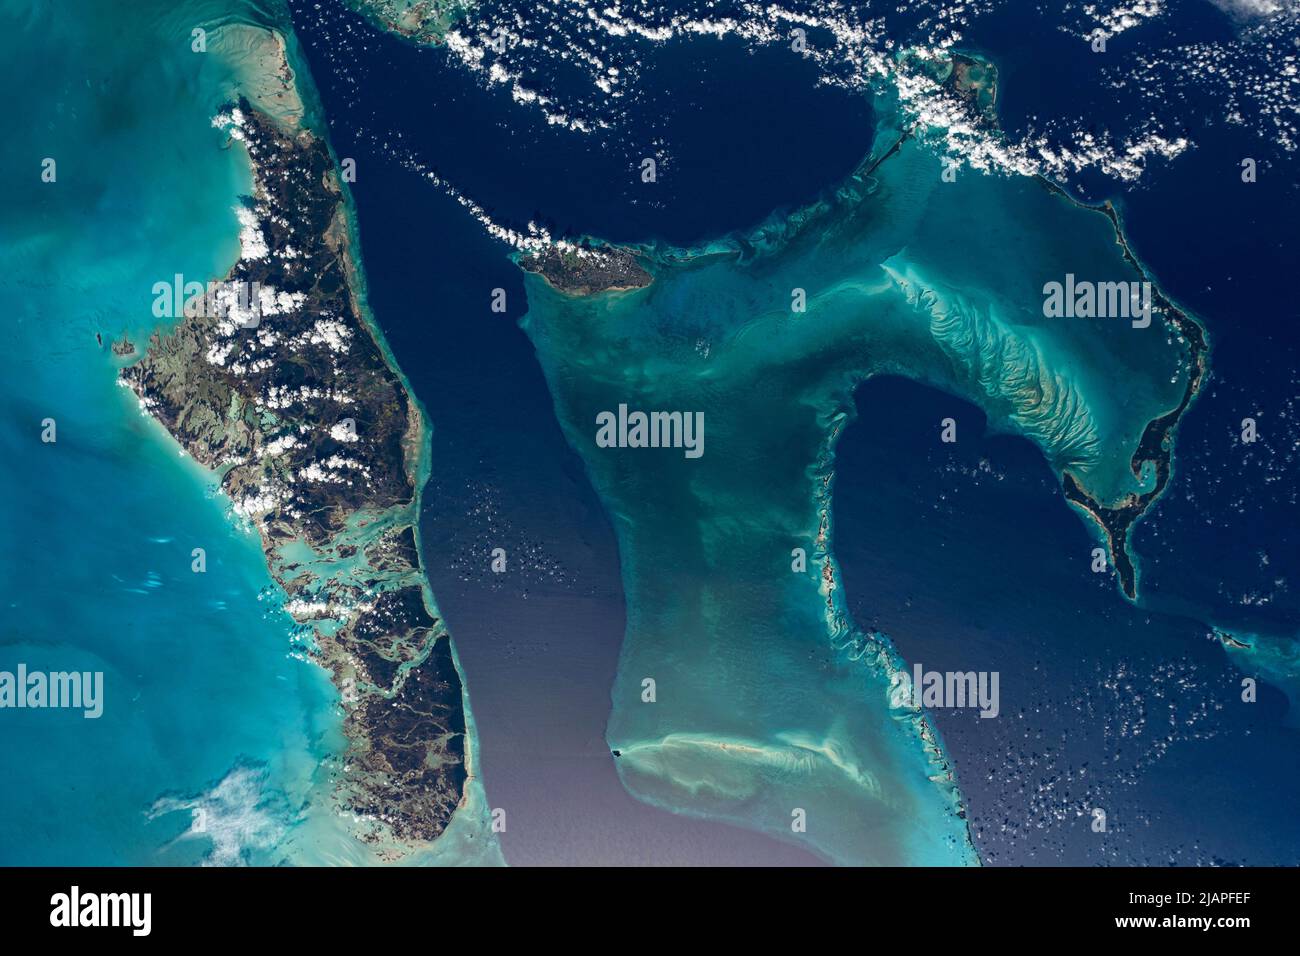 The Bahamas (left), Nassau (middle), Eleuthera (right). A view of Earth from the International Space Station (ISS) 1 December 2021  An optimised and digitally enhanced version of a NASA/ ESA image. Mandatory Credit: NASA/ESA/M.Maure. NB: Usage restrictions: Not to be presented as an endorsement. Stock Photo